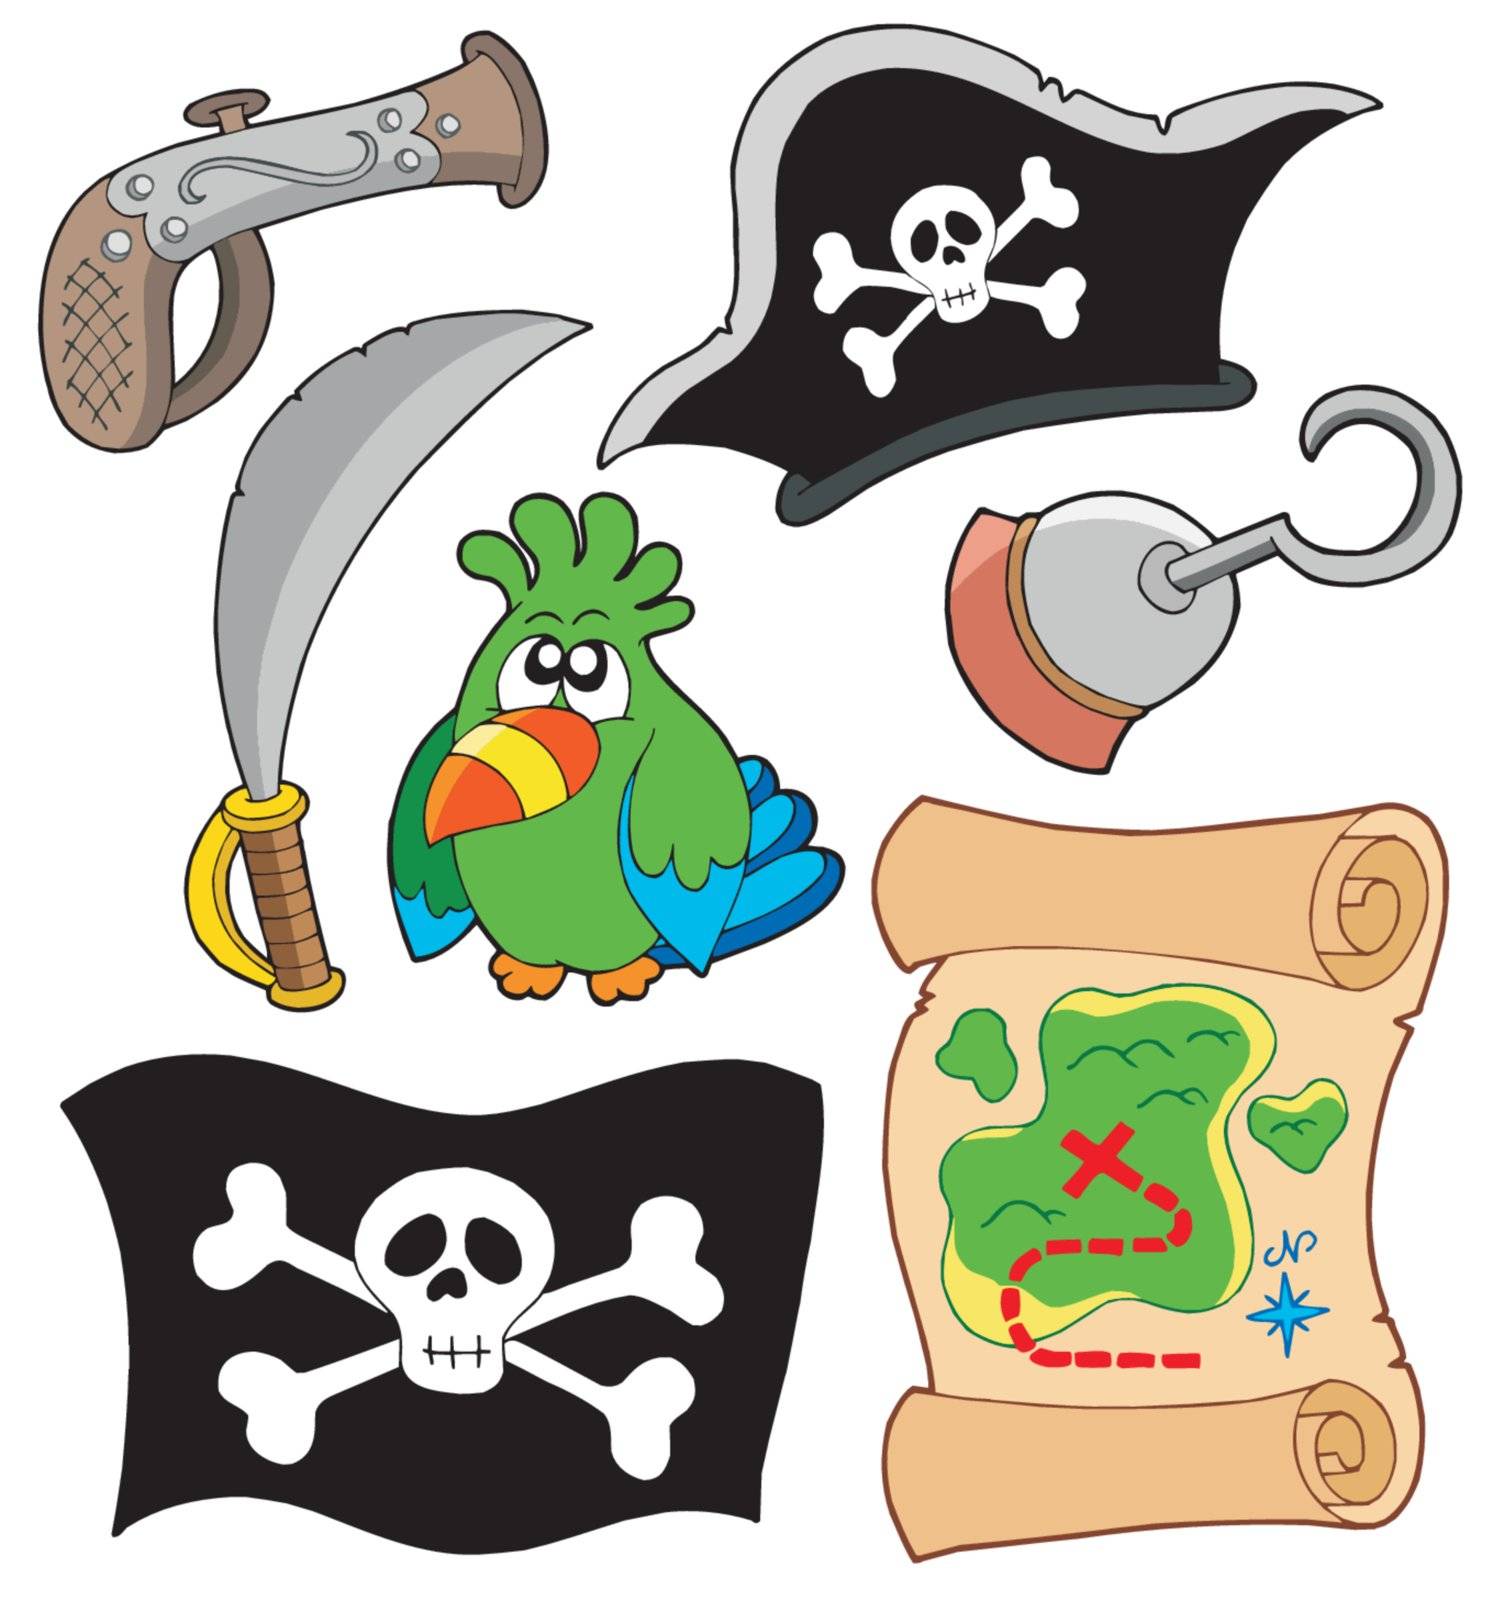 Pirate equipment collection - vector illustration.